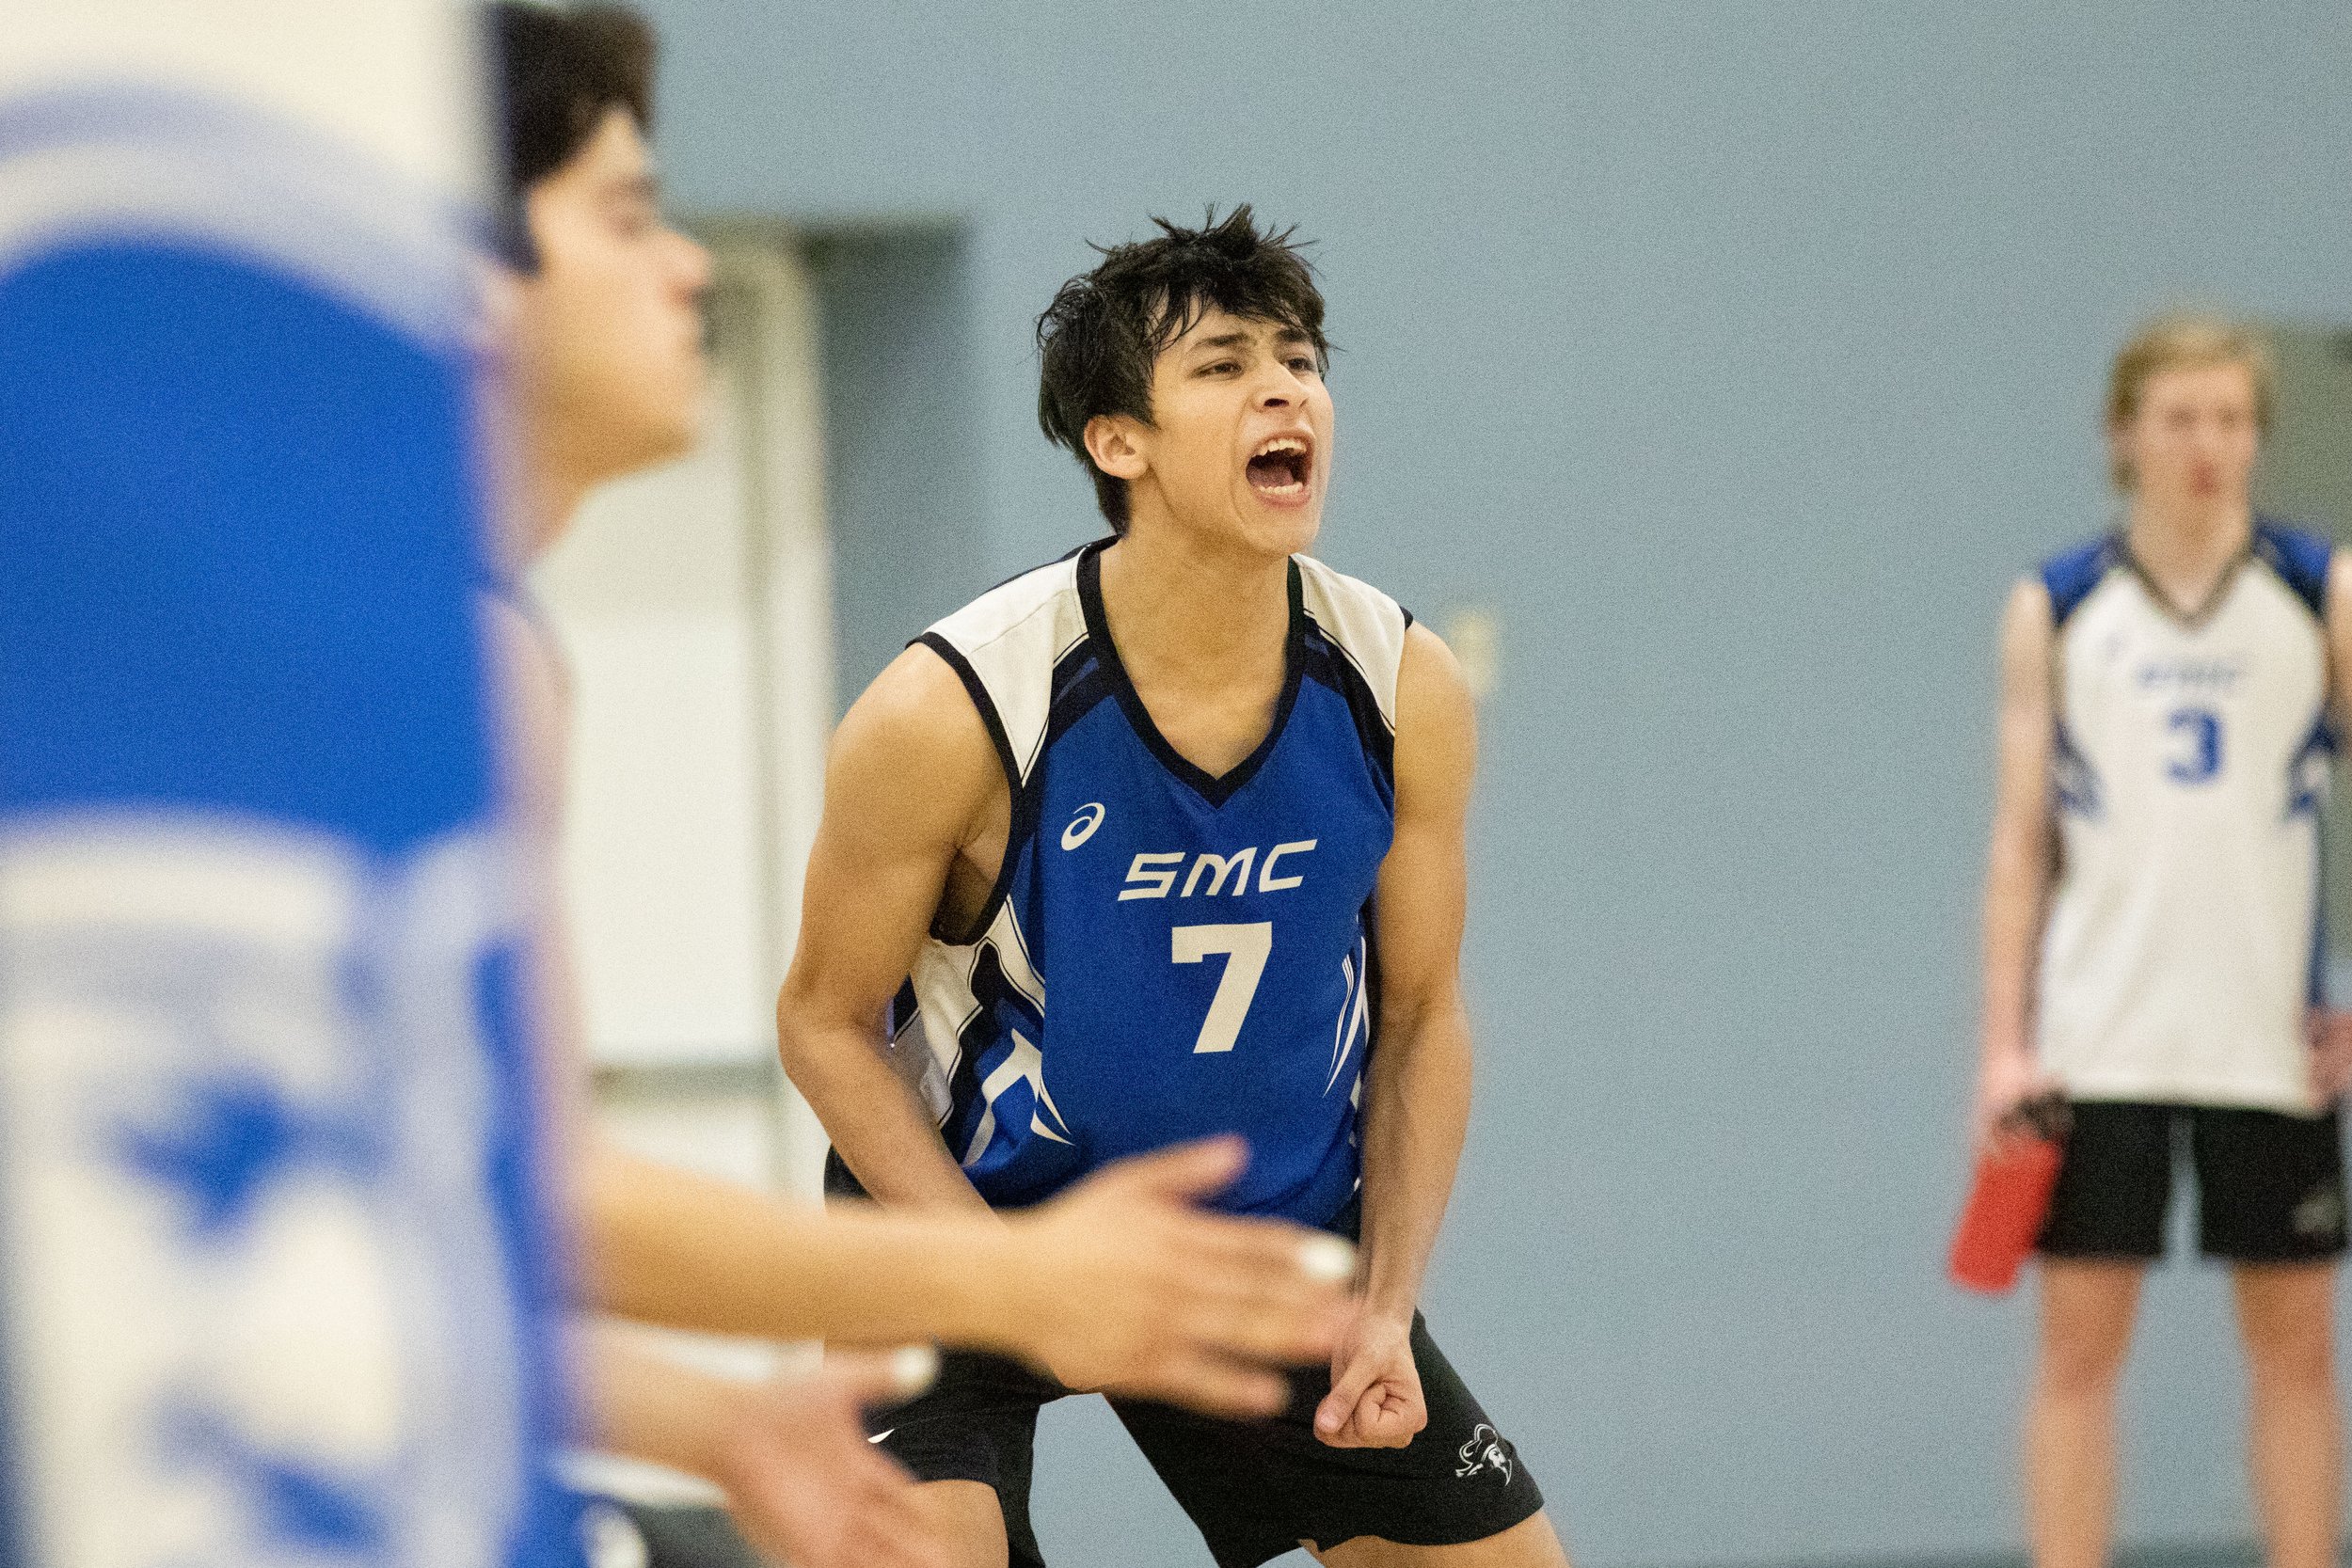  Santa Monica College Corsair libero Javier Castillo (7) cheering after the Corsairs scored during the third set of a home game against Long Beach City College Vikings in Santa Monica, Calif., on Friday, March 3, 2023. The game resulted in the Corsai